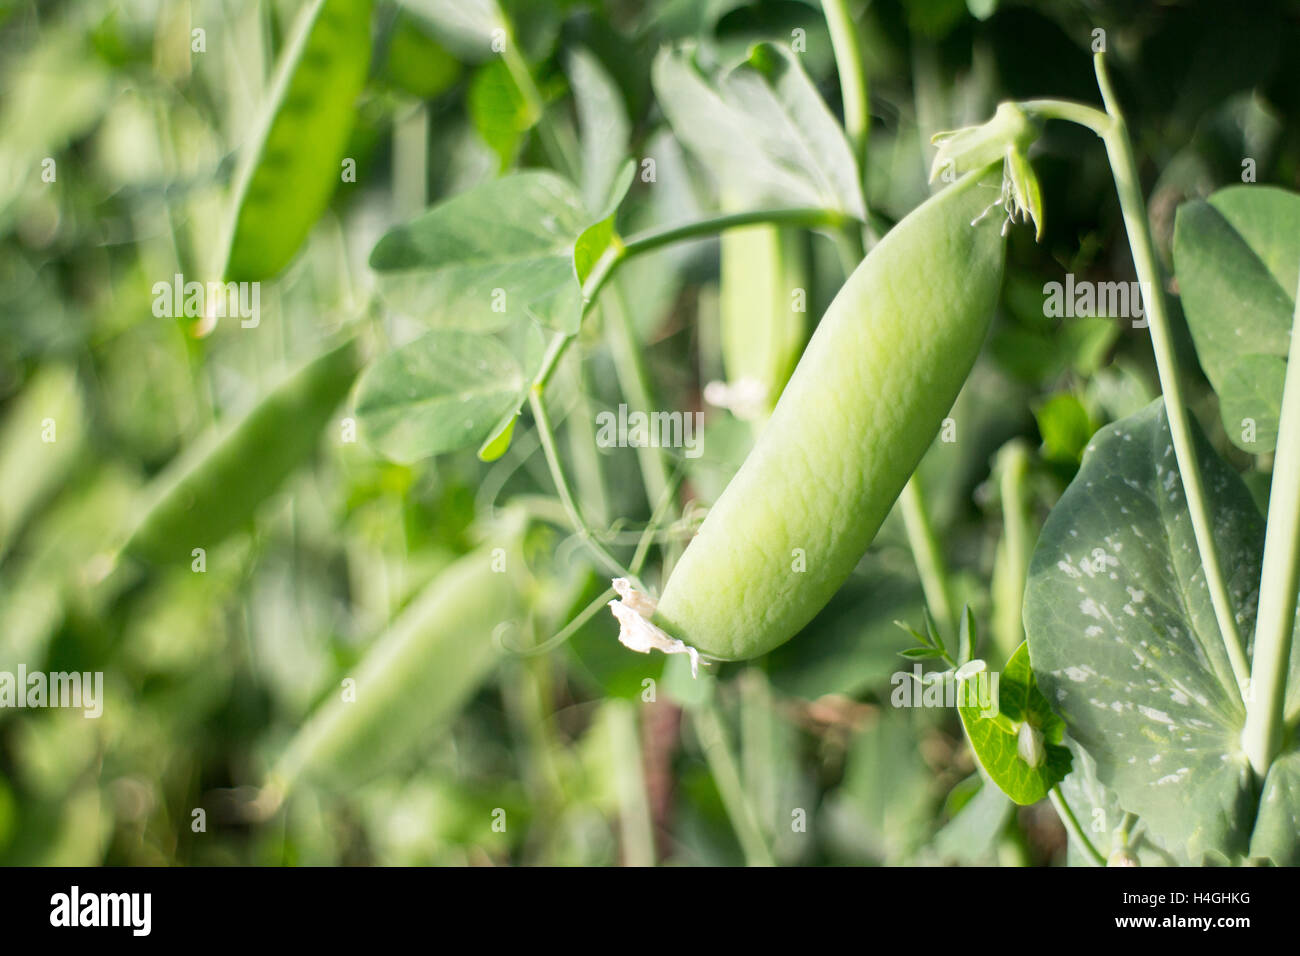 Single green pea pod in focus growing outside on Vancouver Island, British Columbia, food inspired Stock Photo